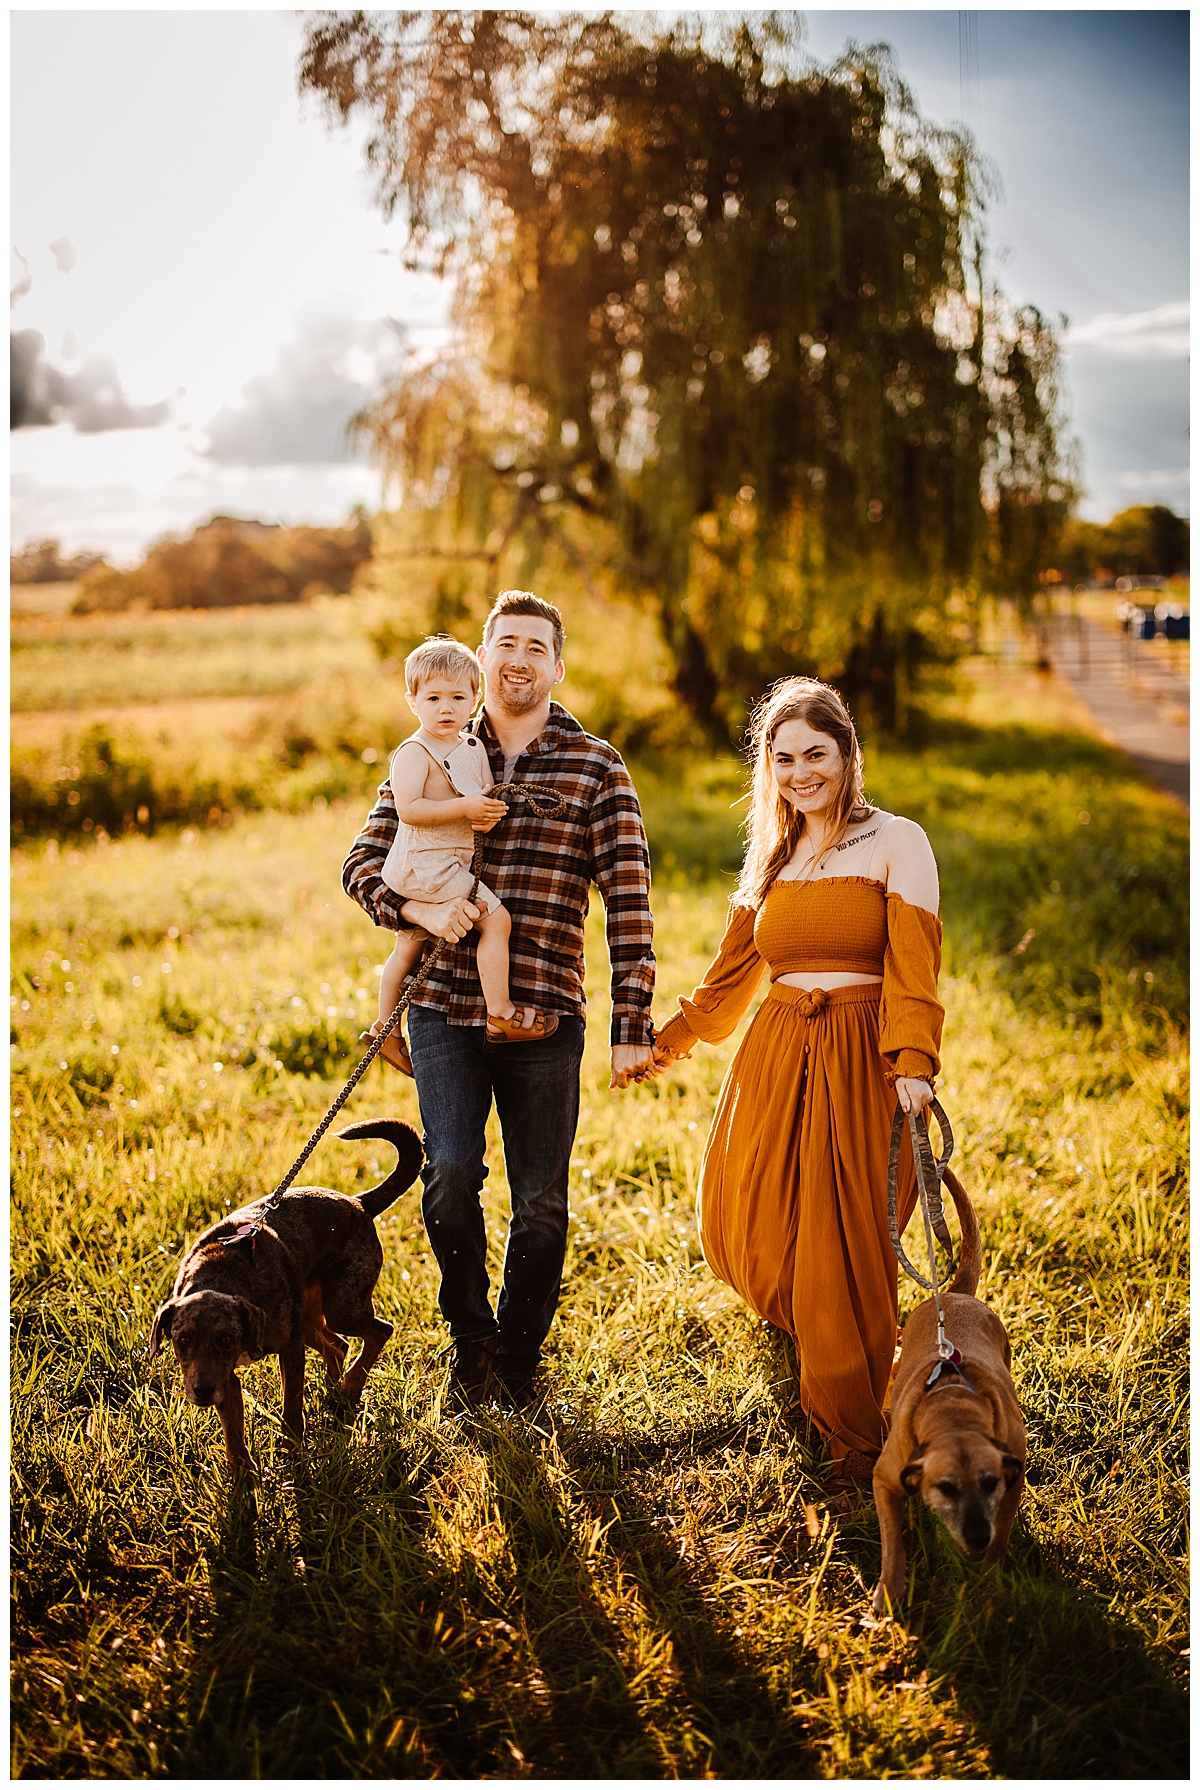 Full family walks through grass by Norma Fayak Photography